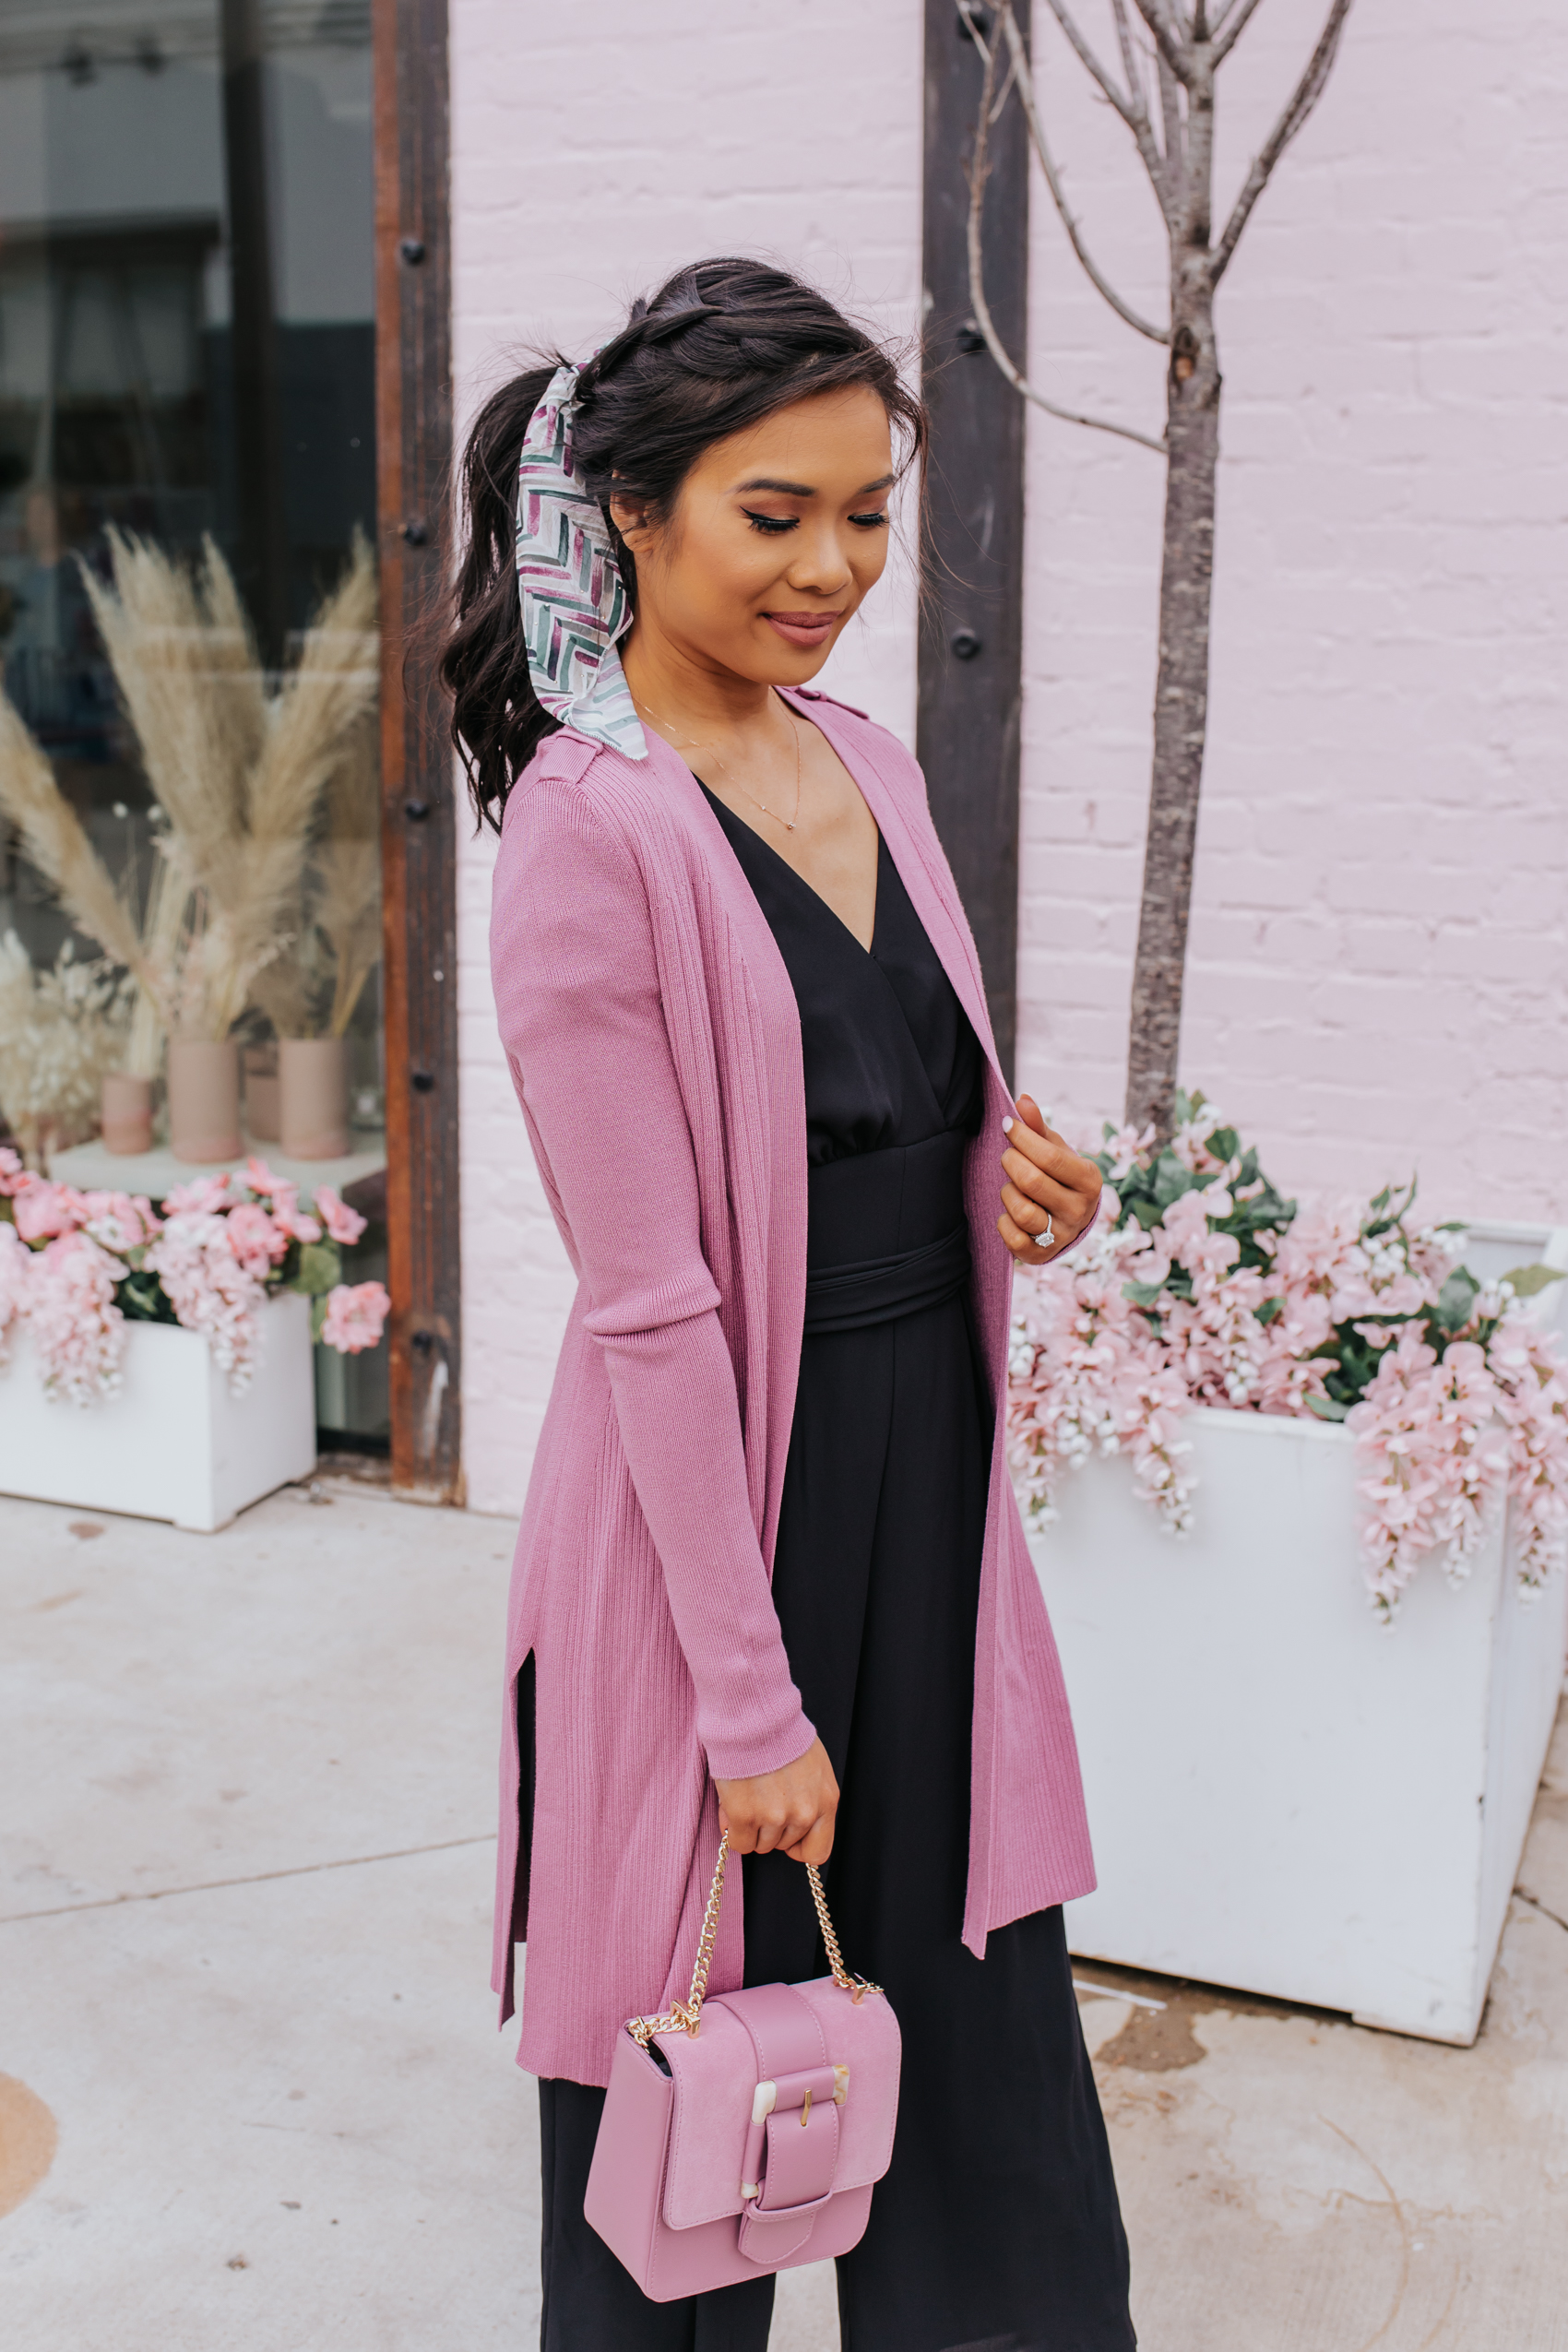 Braided hairstyles for spring with a loose dutch braid by Tousled Studio, black jumpsuit, pink cardigan, pink clutch on petite Dallas Blogger Hoang-Kim